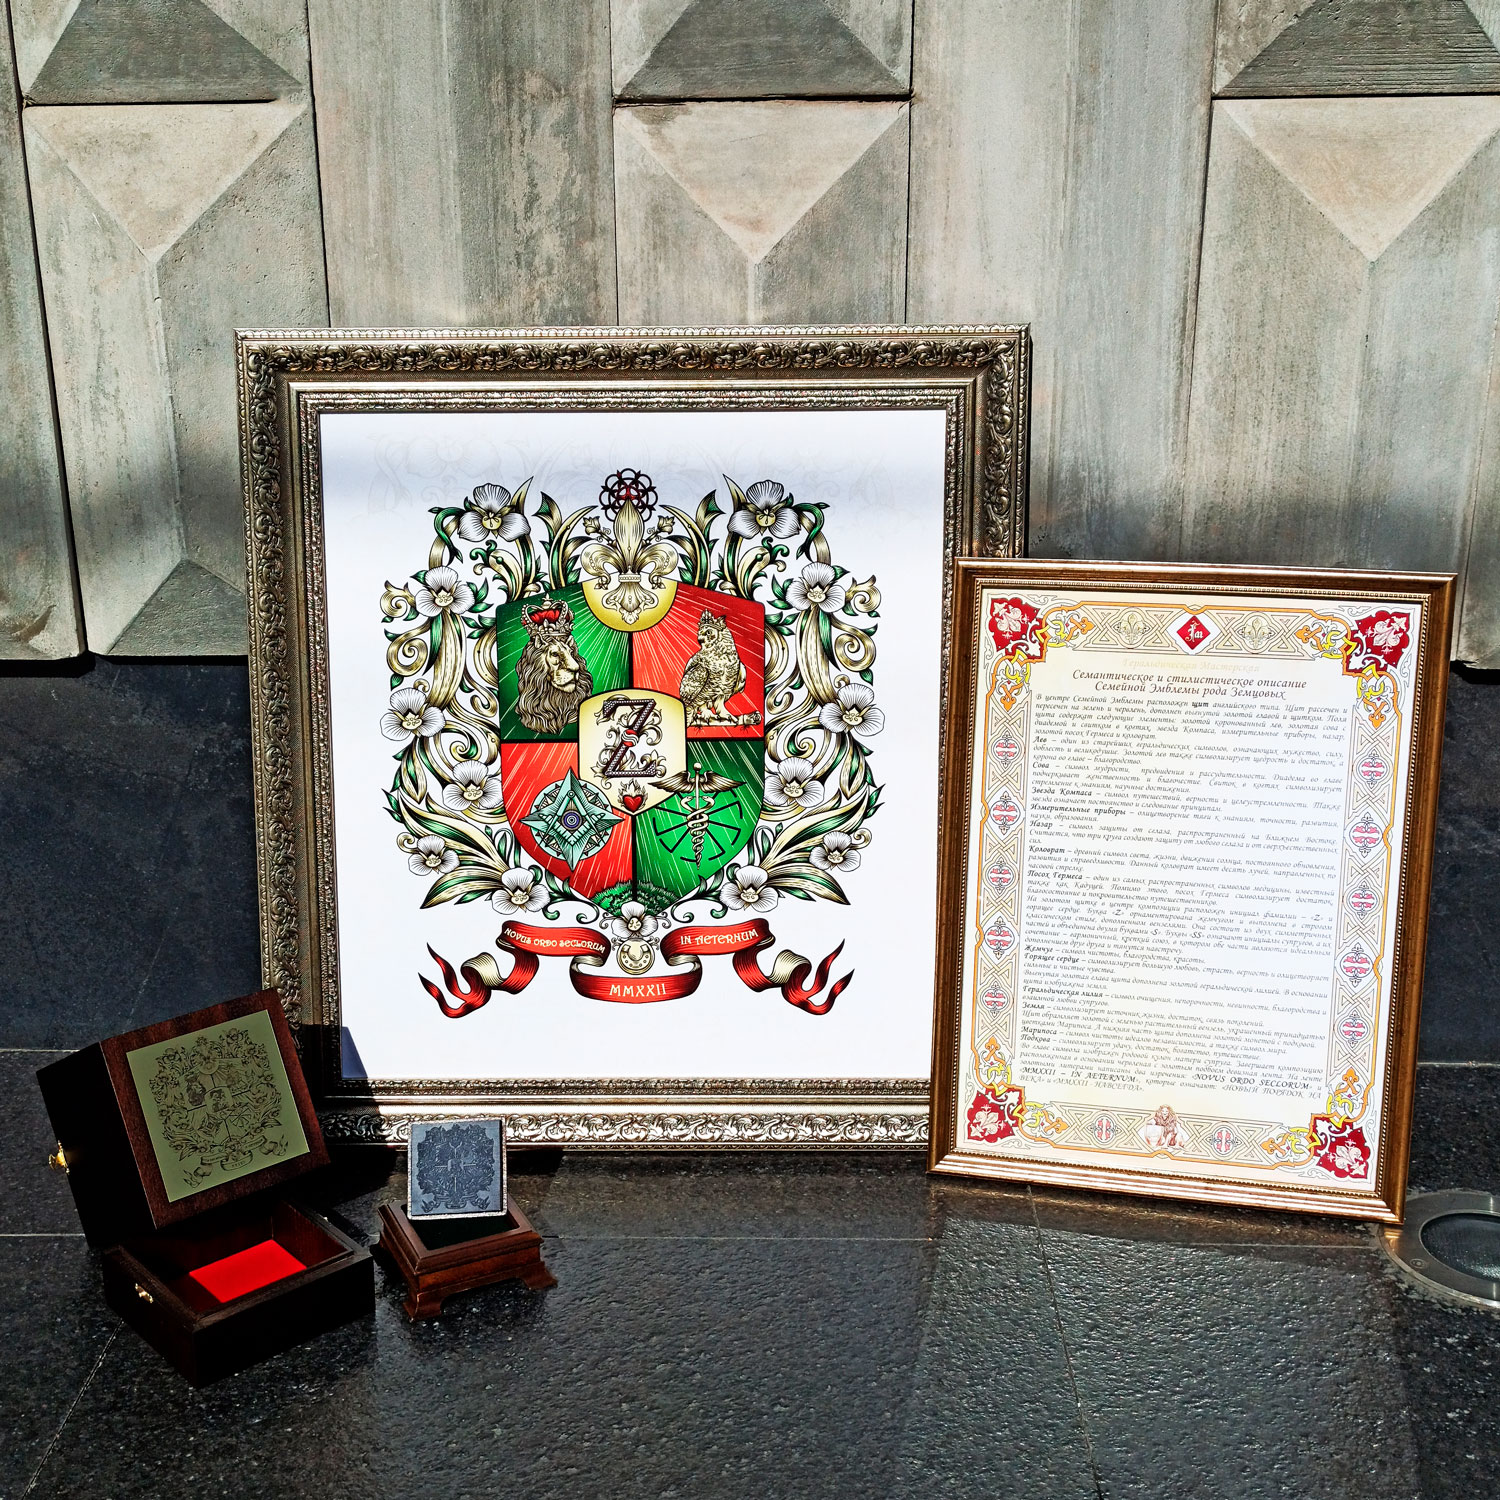 a picture with a family emblem - a new family heirloom